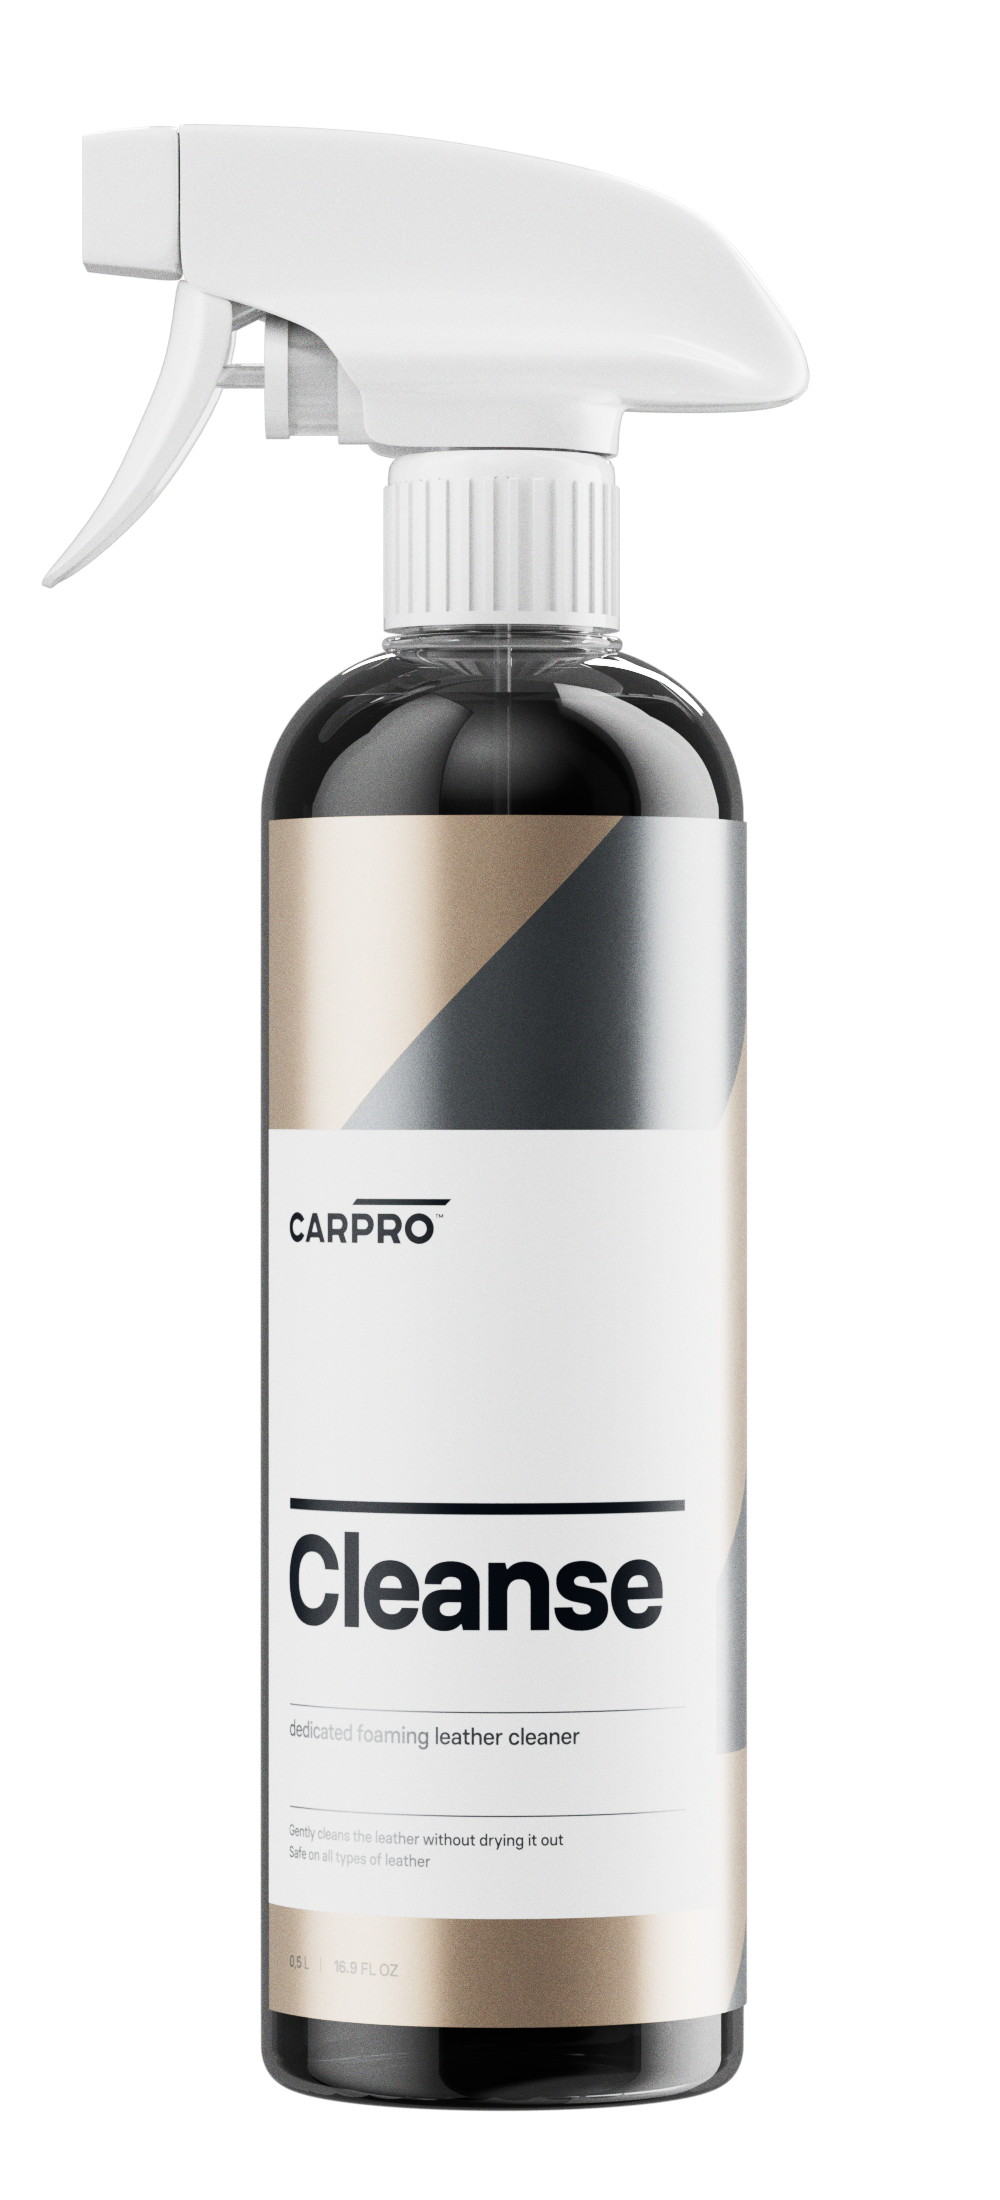 CARPRO - Cleanse 500ml (Leather cleaner)